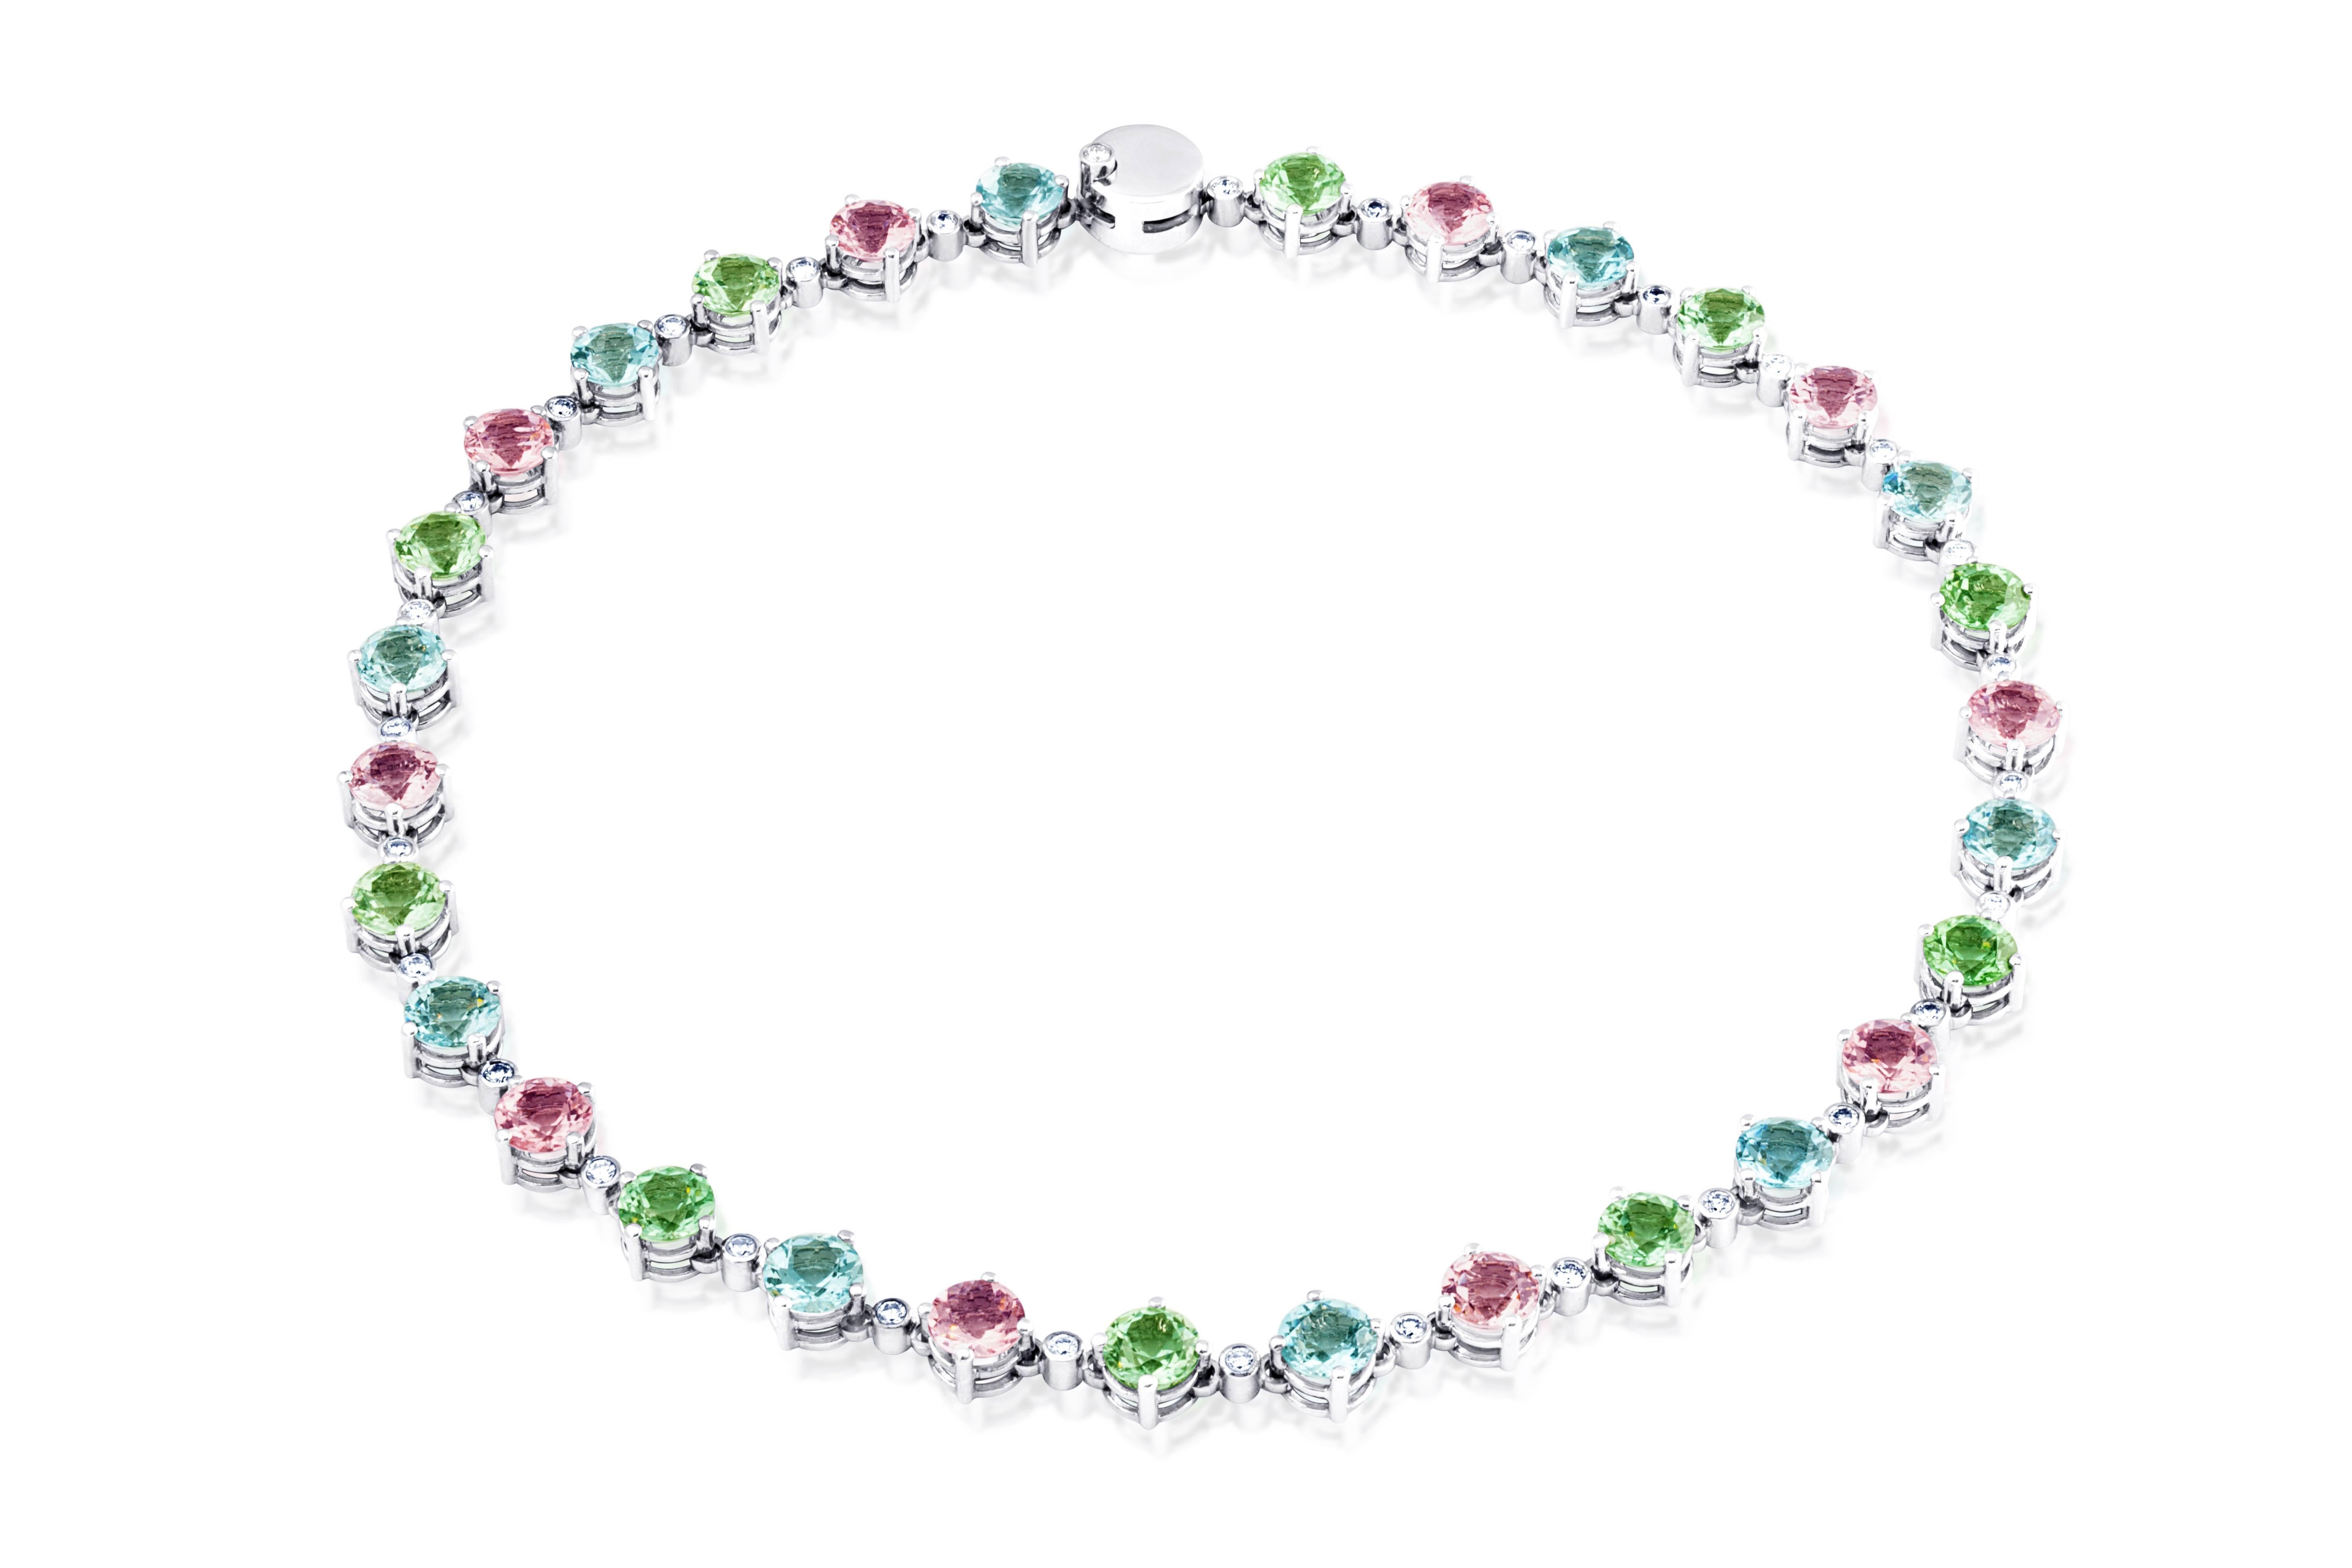 Thomas Leyser is renowned for his contemporary jewellery designs utilizing fine gemstones.

This 18k white gold (62.26g) necklace has 30x fine facetted gemstones (round, 8mm, Tourmalines: 19.11ct, Aquamarines: 16.76ct, Morganites: 16.64ct) + 31x